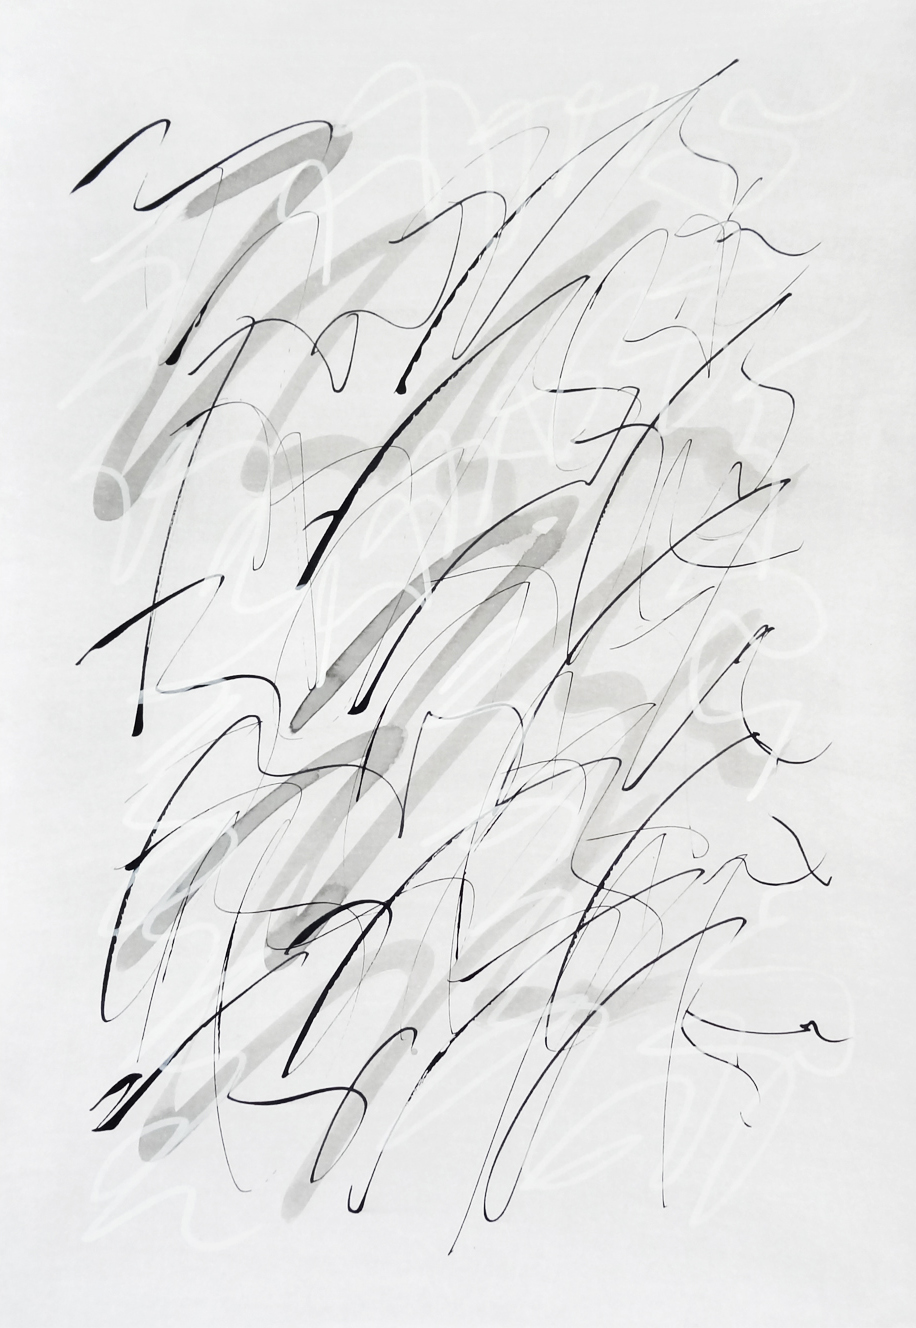  Untitled, 2019 calligraphy ink on paper 42,0 x 29,7 cm (29-19) 